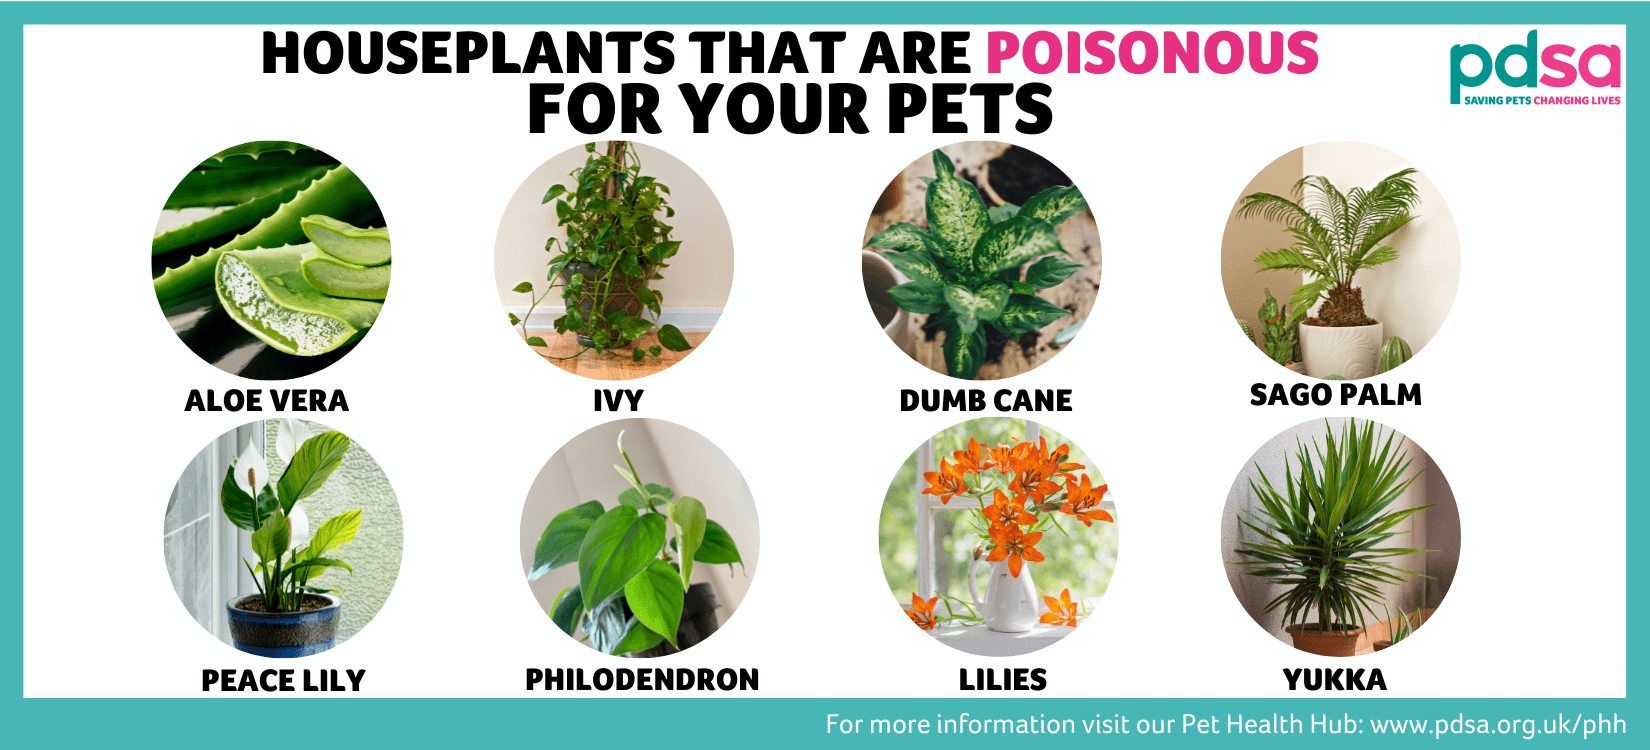 An image displaying indoor plants that are poisonous to pets